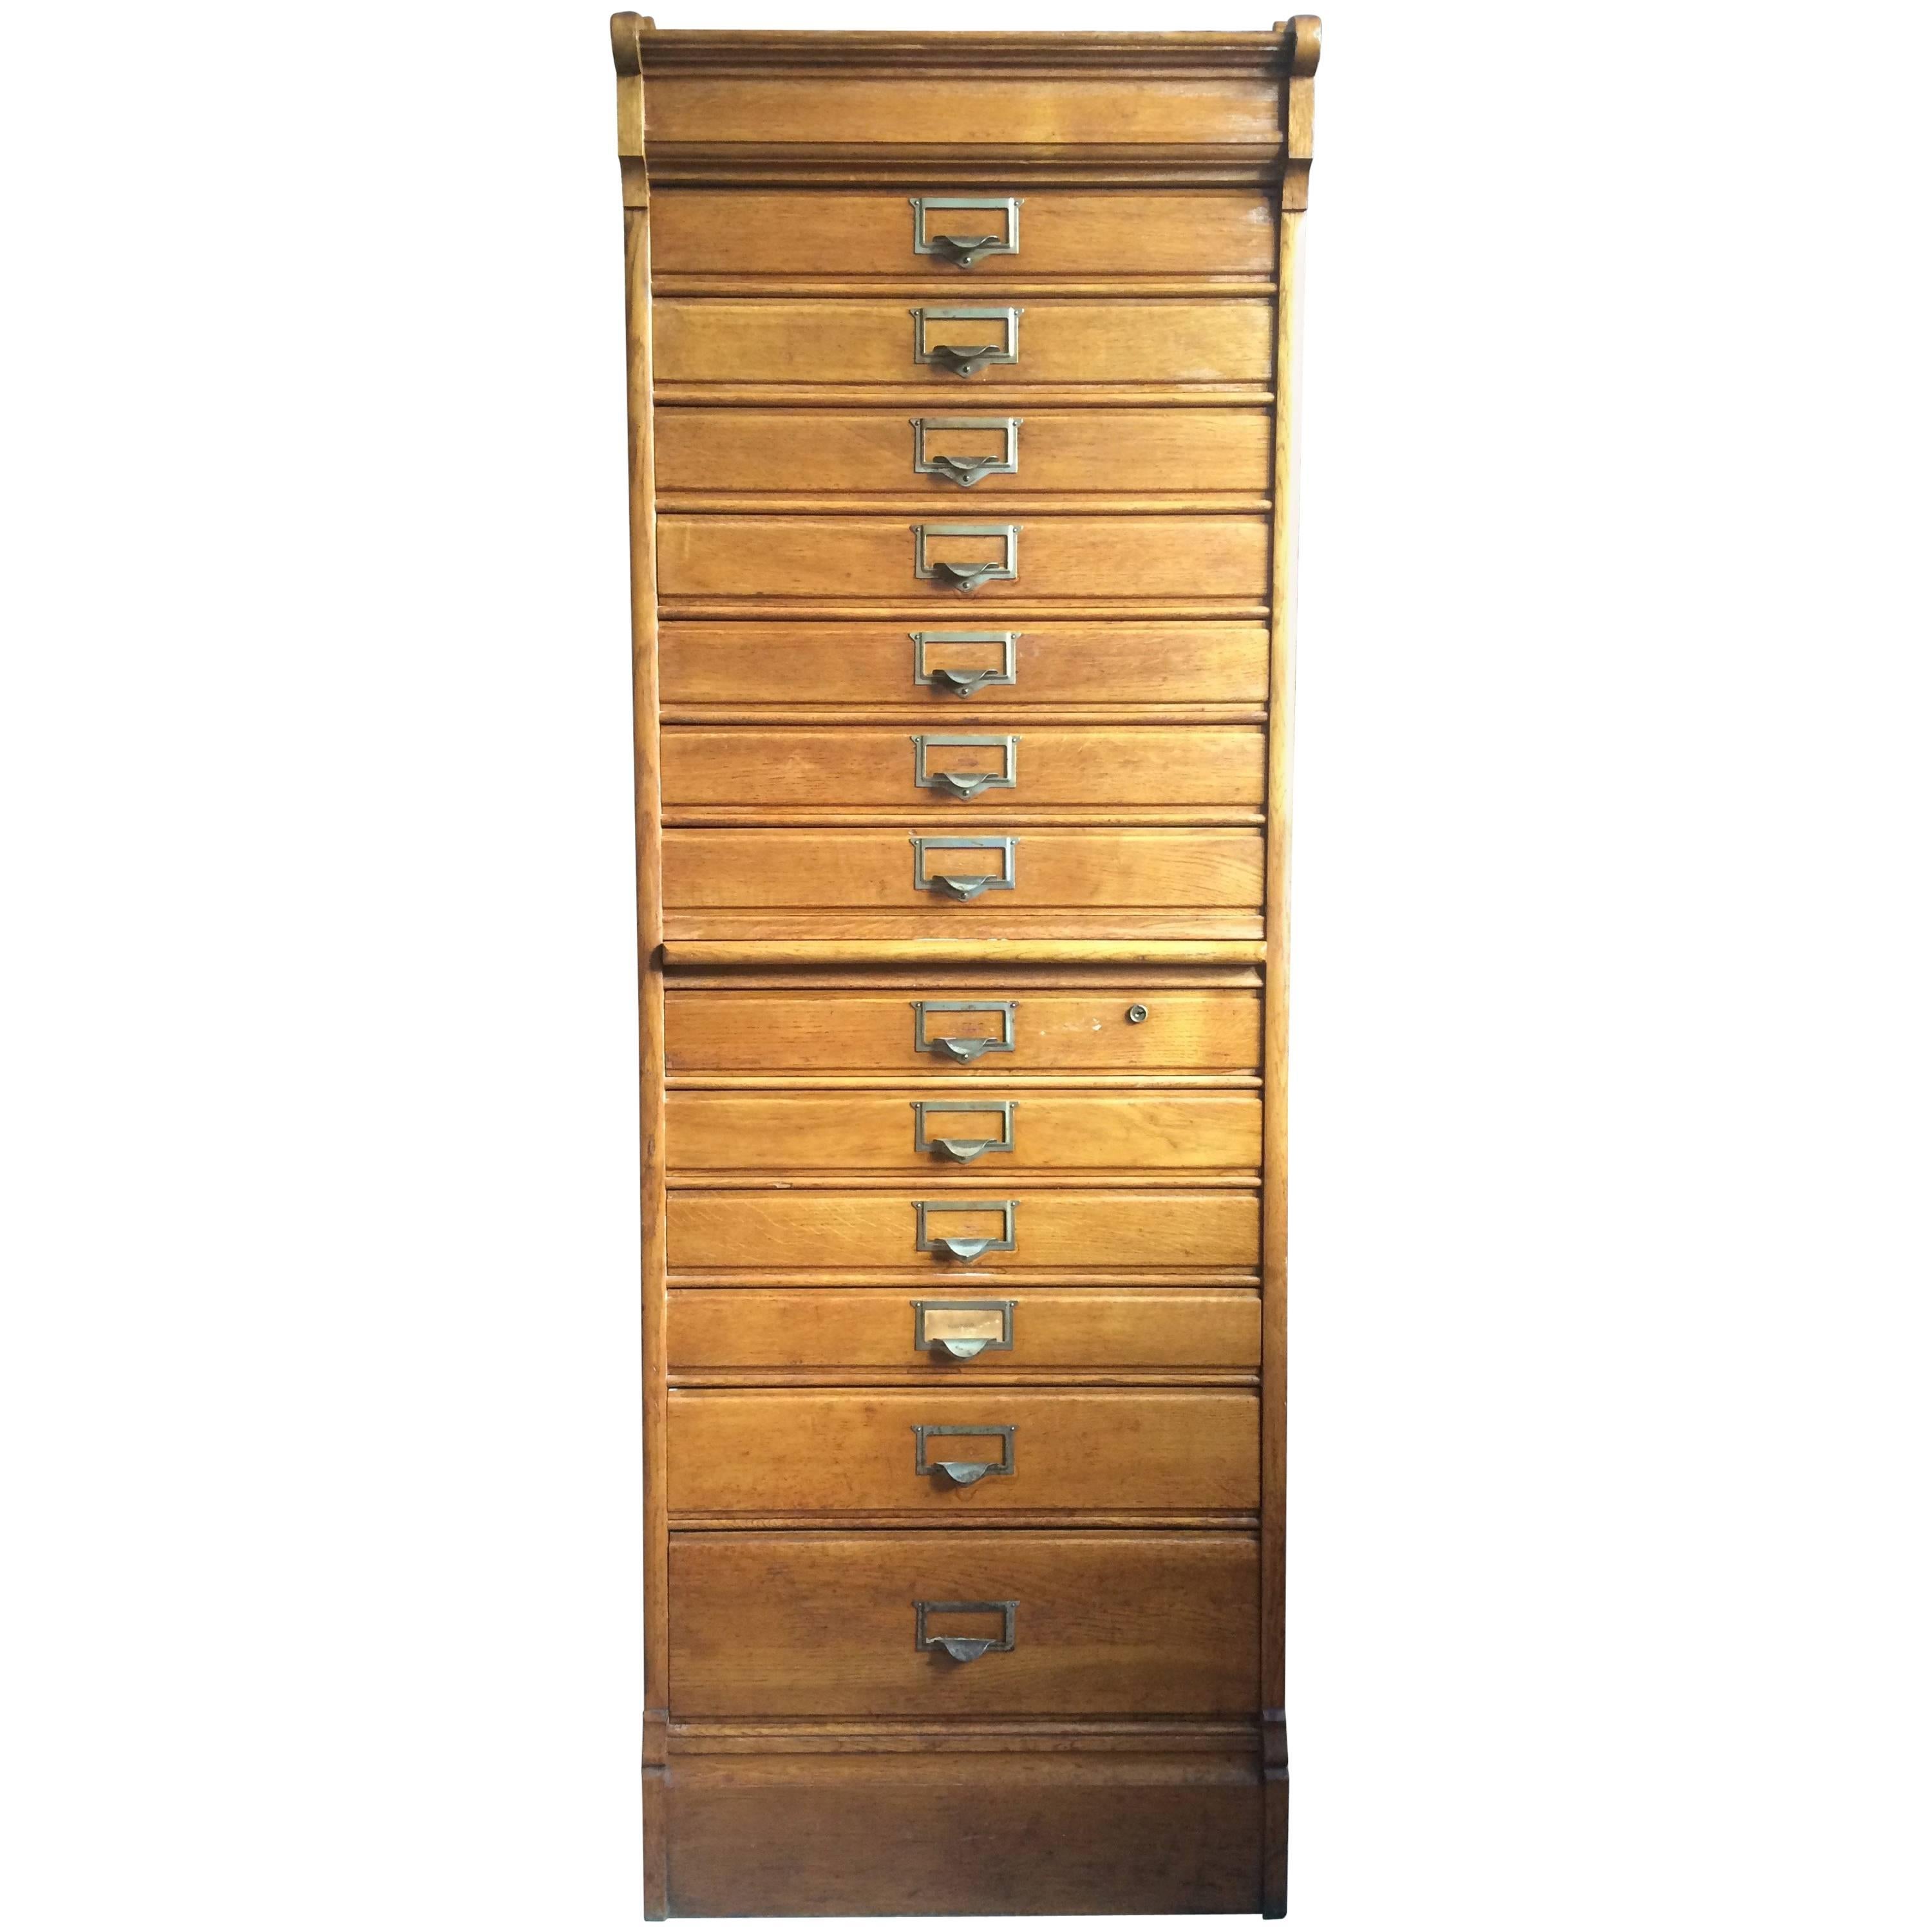 Vintage Office Cabinet with 13 Drawers, Oak, Brass Hardware